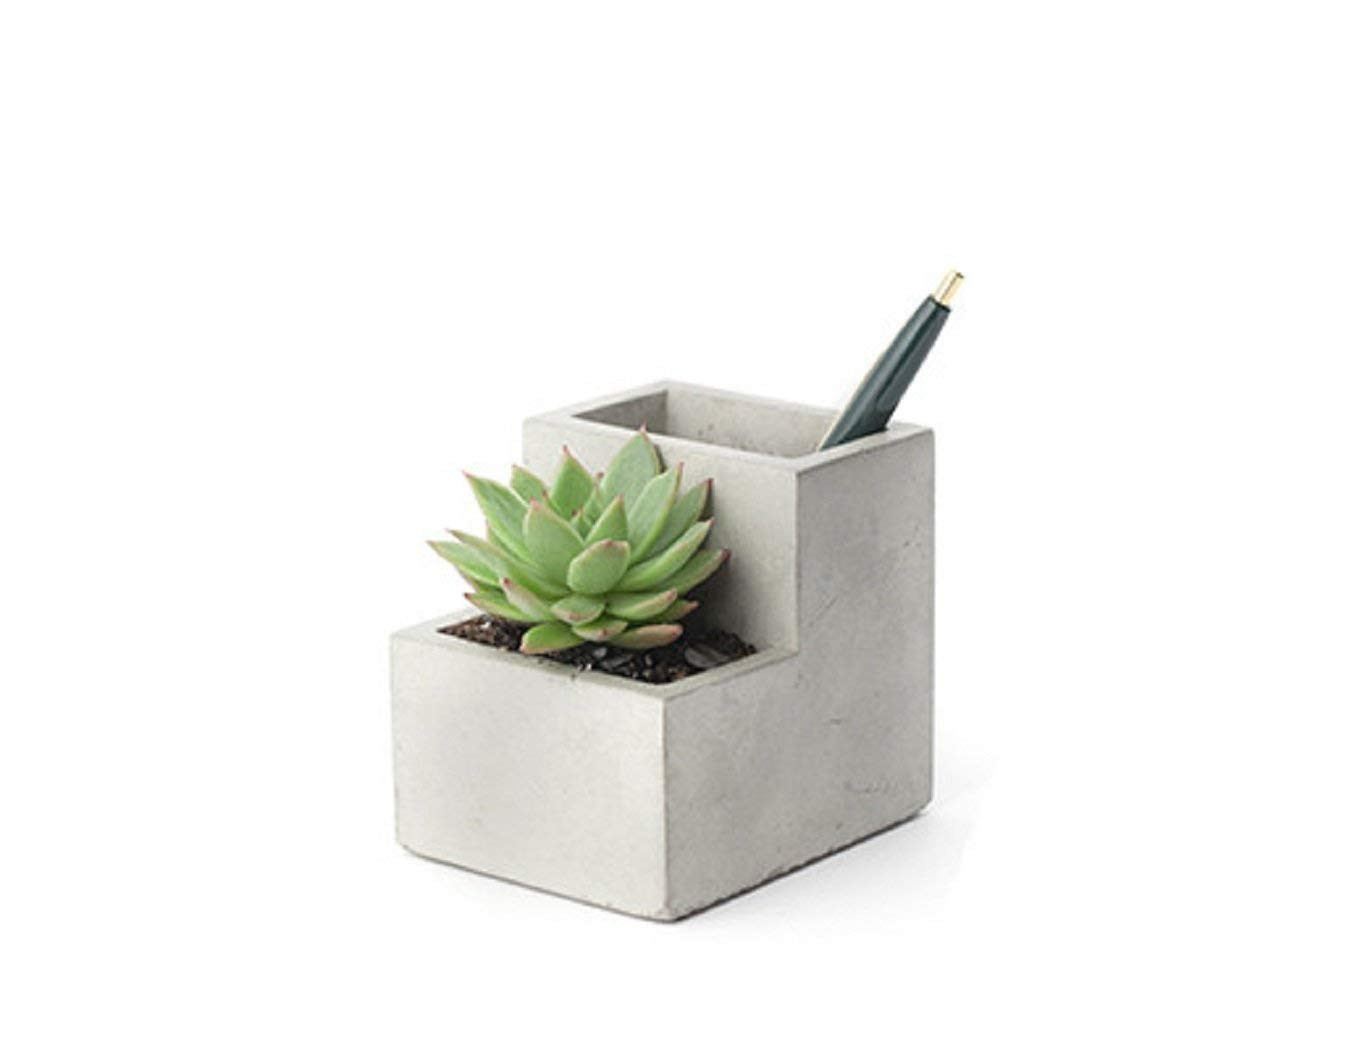 21 Popular Modgy Expandable Vase 2024 free download modgy expandable vase of kikkerland concrete desktop planter large pl02 l amazon ca throughout kikkerland concrete desktop planter large pl02 l amazon ca office products